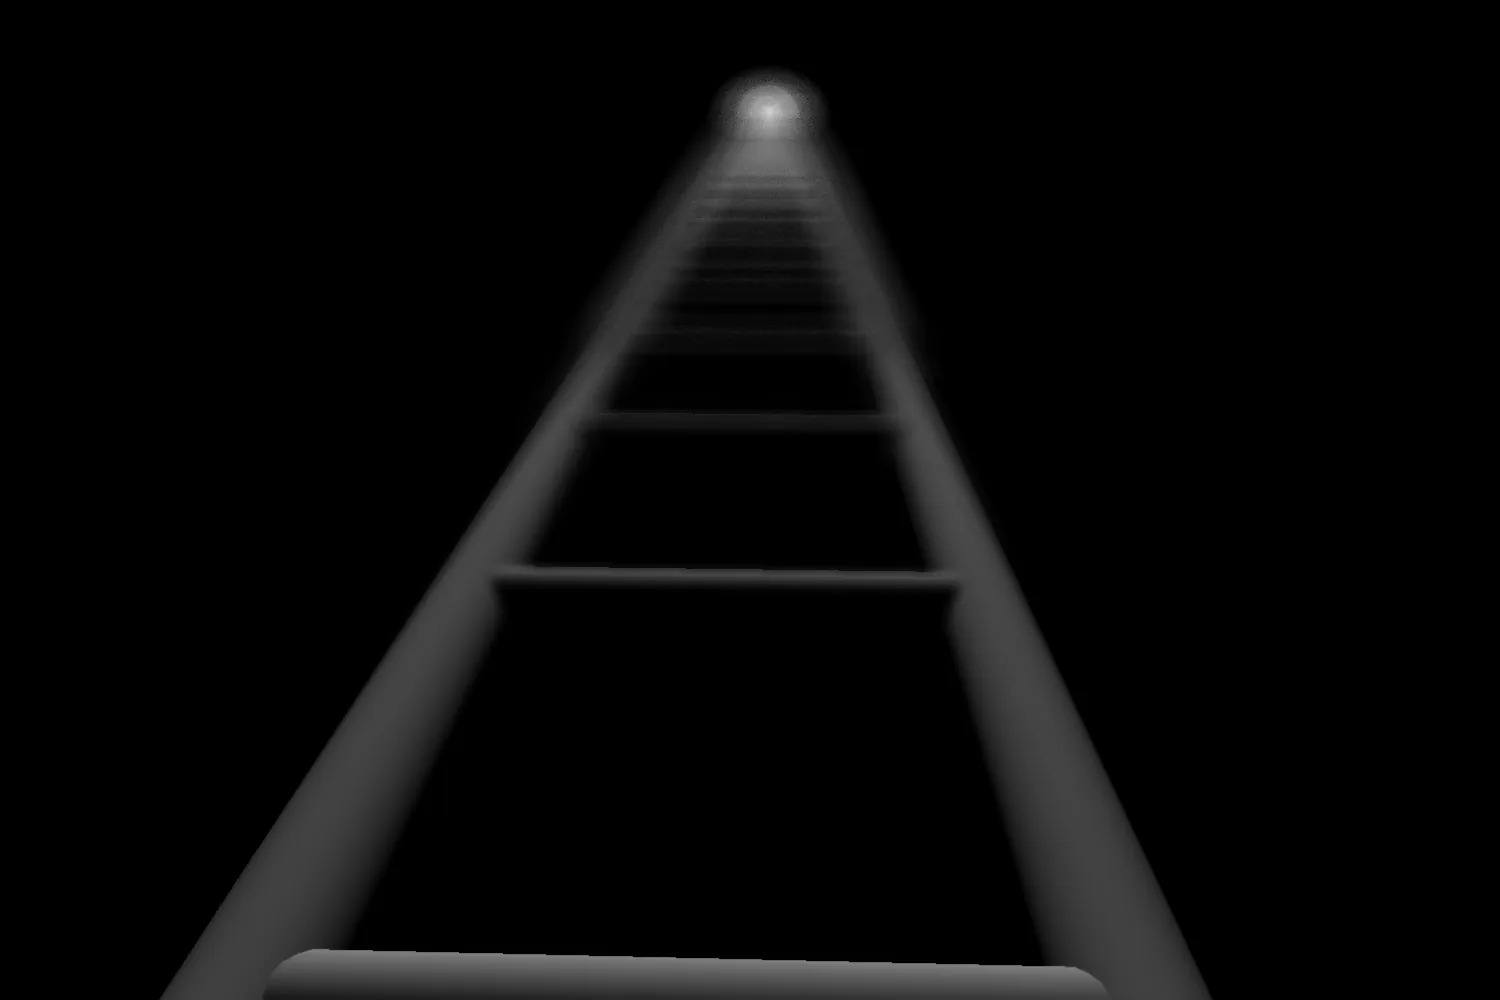 A ladder looking up a shaft towards some light, going progressively more out of focus as it goes into the distance